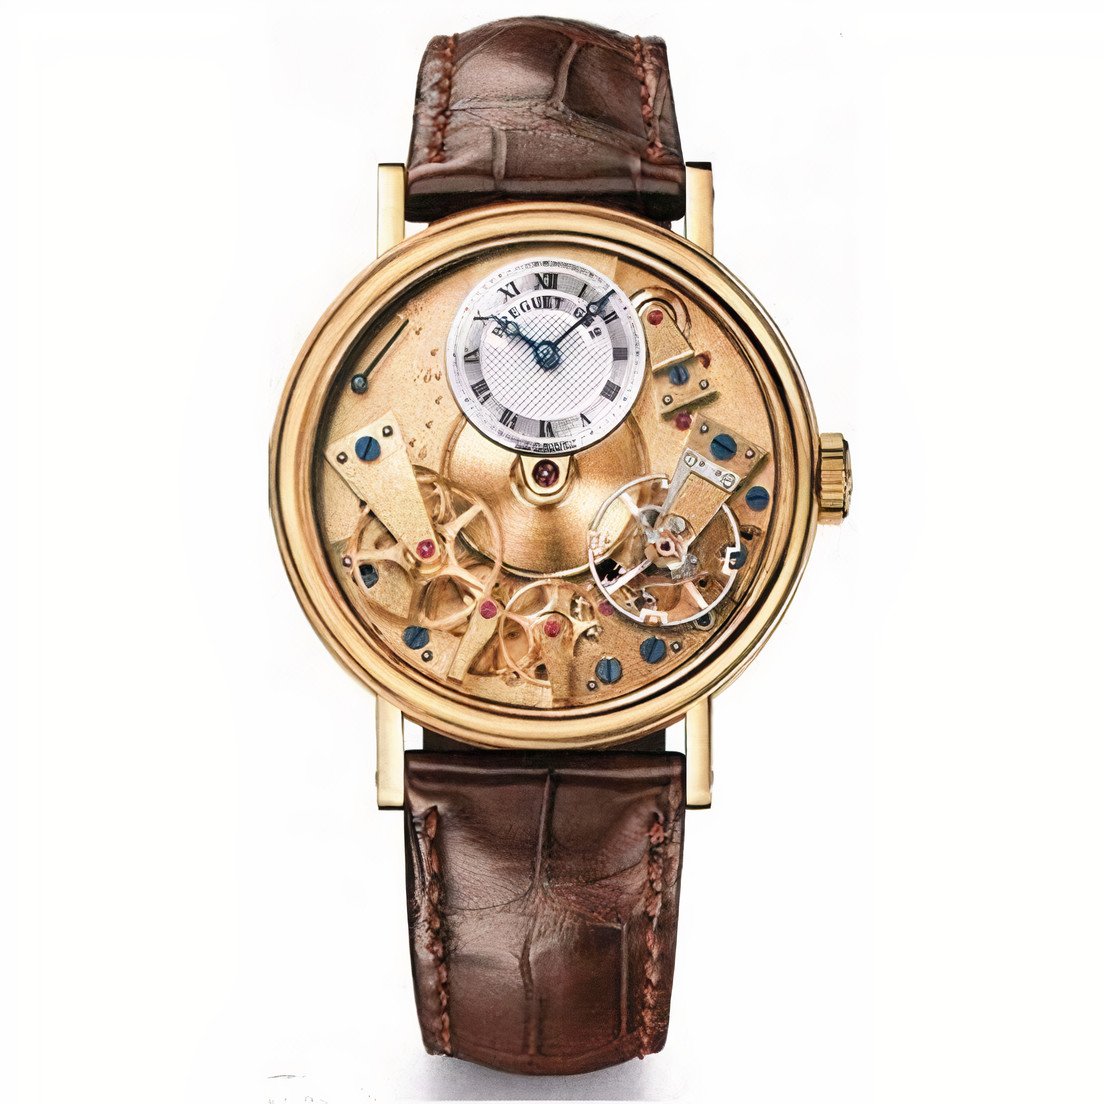 PPT - The World's Top Most Expensive Watch Brands PowerPoint Presentation -  ID:7912913